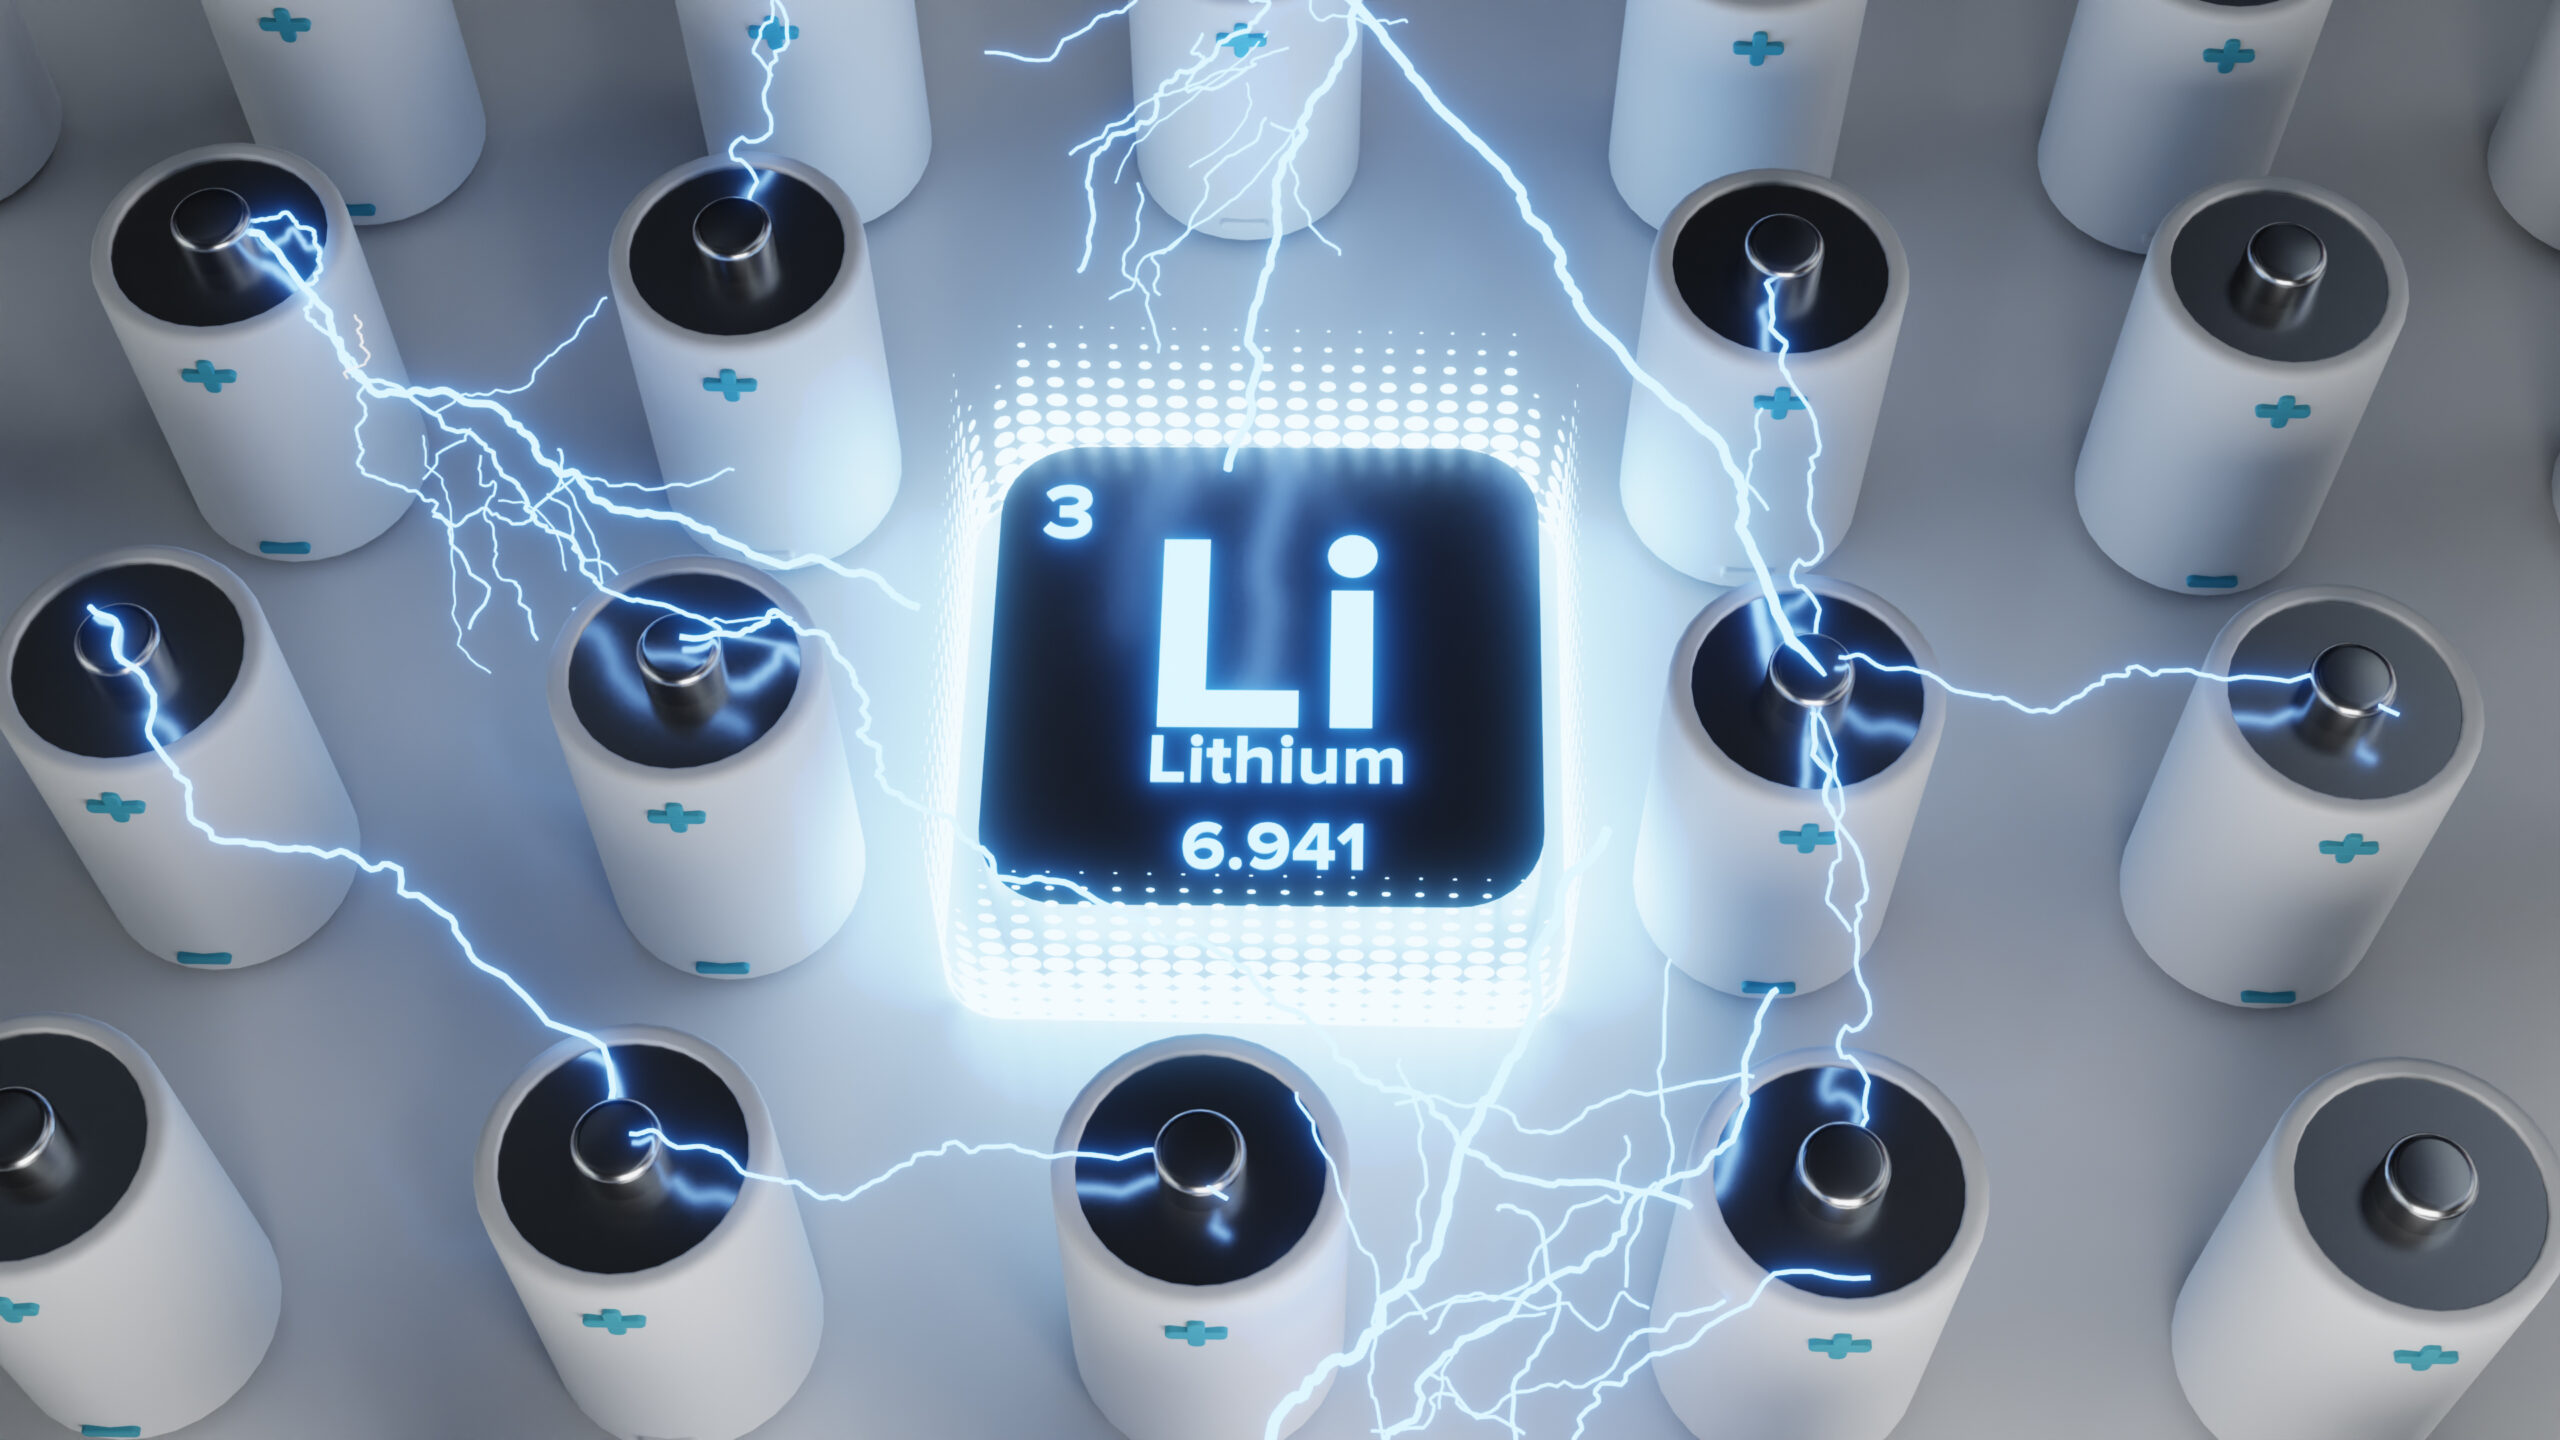 World Renowned Critical Minerals Expert Constantine Karayannopoulos is Bullish on Lithium [Video]